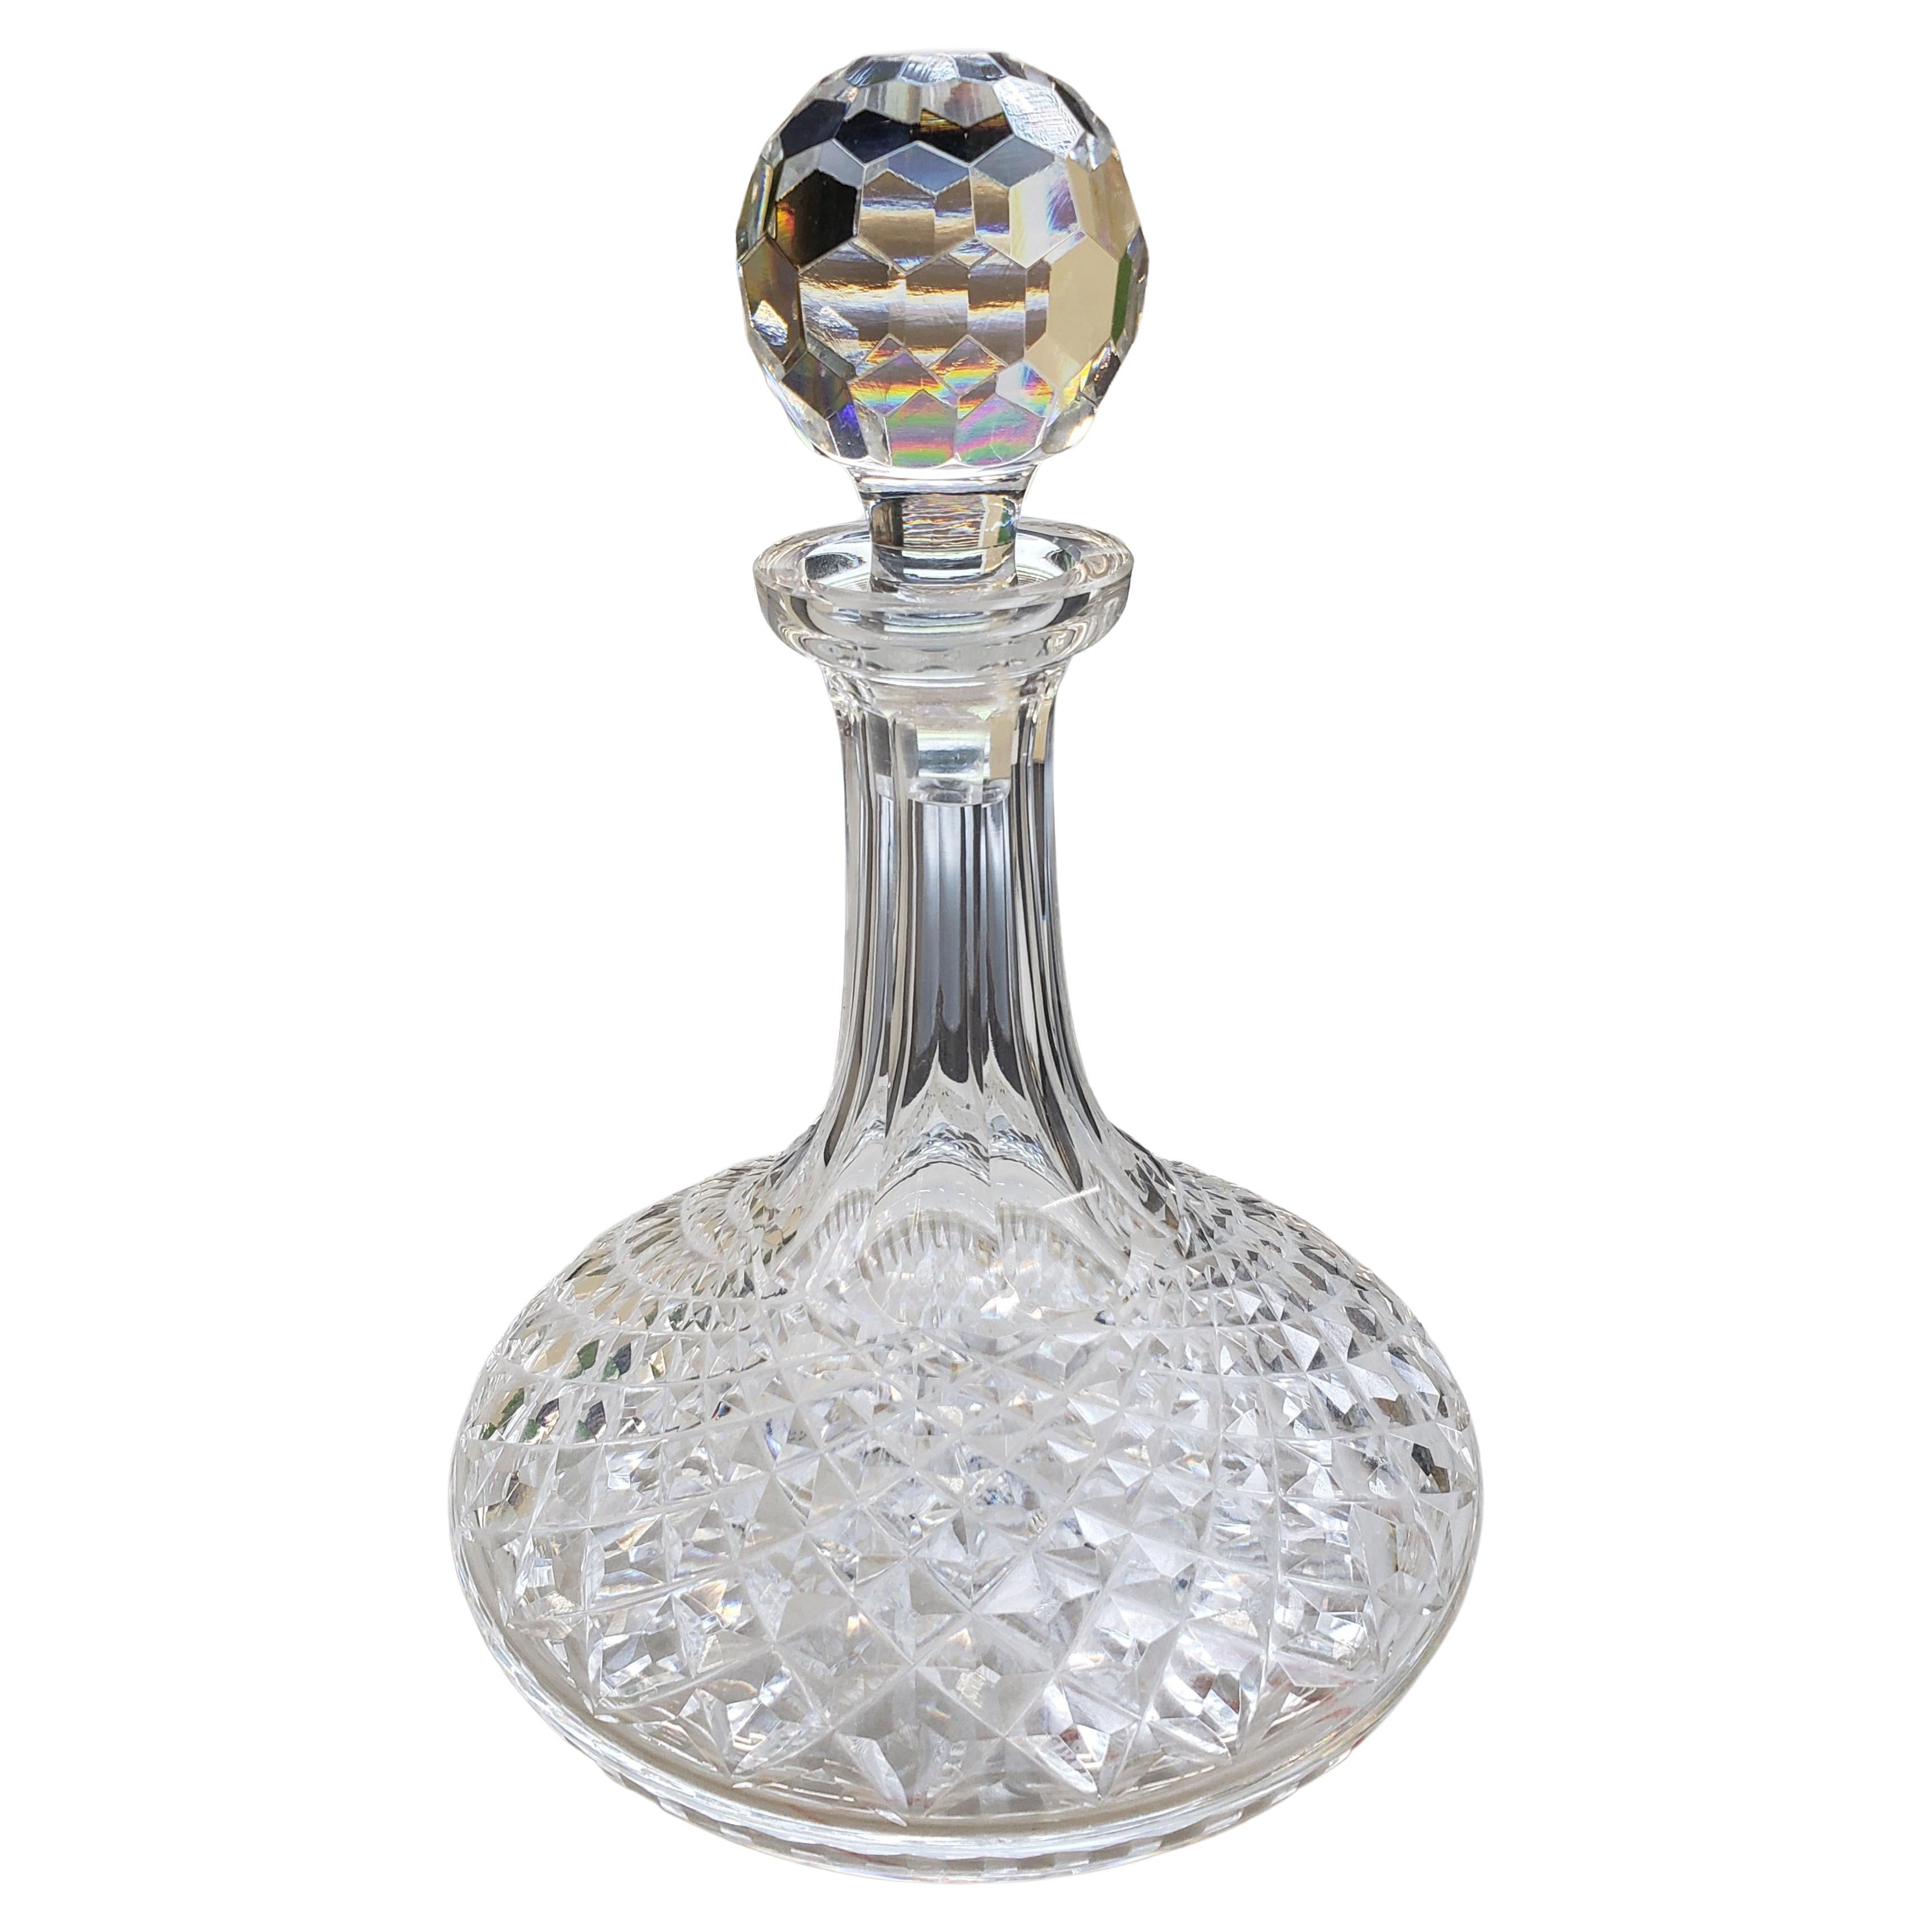 https://a.1stdibscdn.com/waterford-crystal-ships-decanter-and-stopper-alana-for-sale/f_57512/f_341179621683176007145/f_34117962_1683176008572_bg_processed.jpg